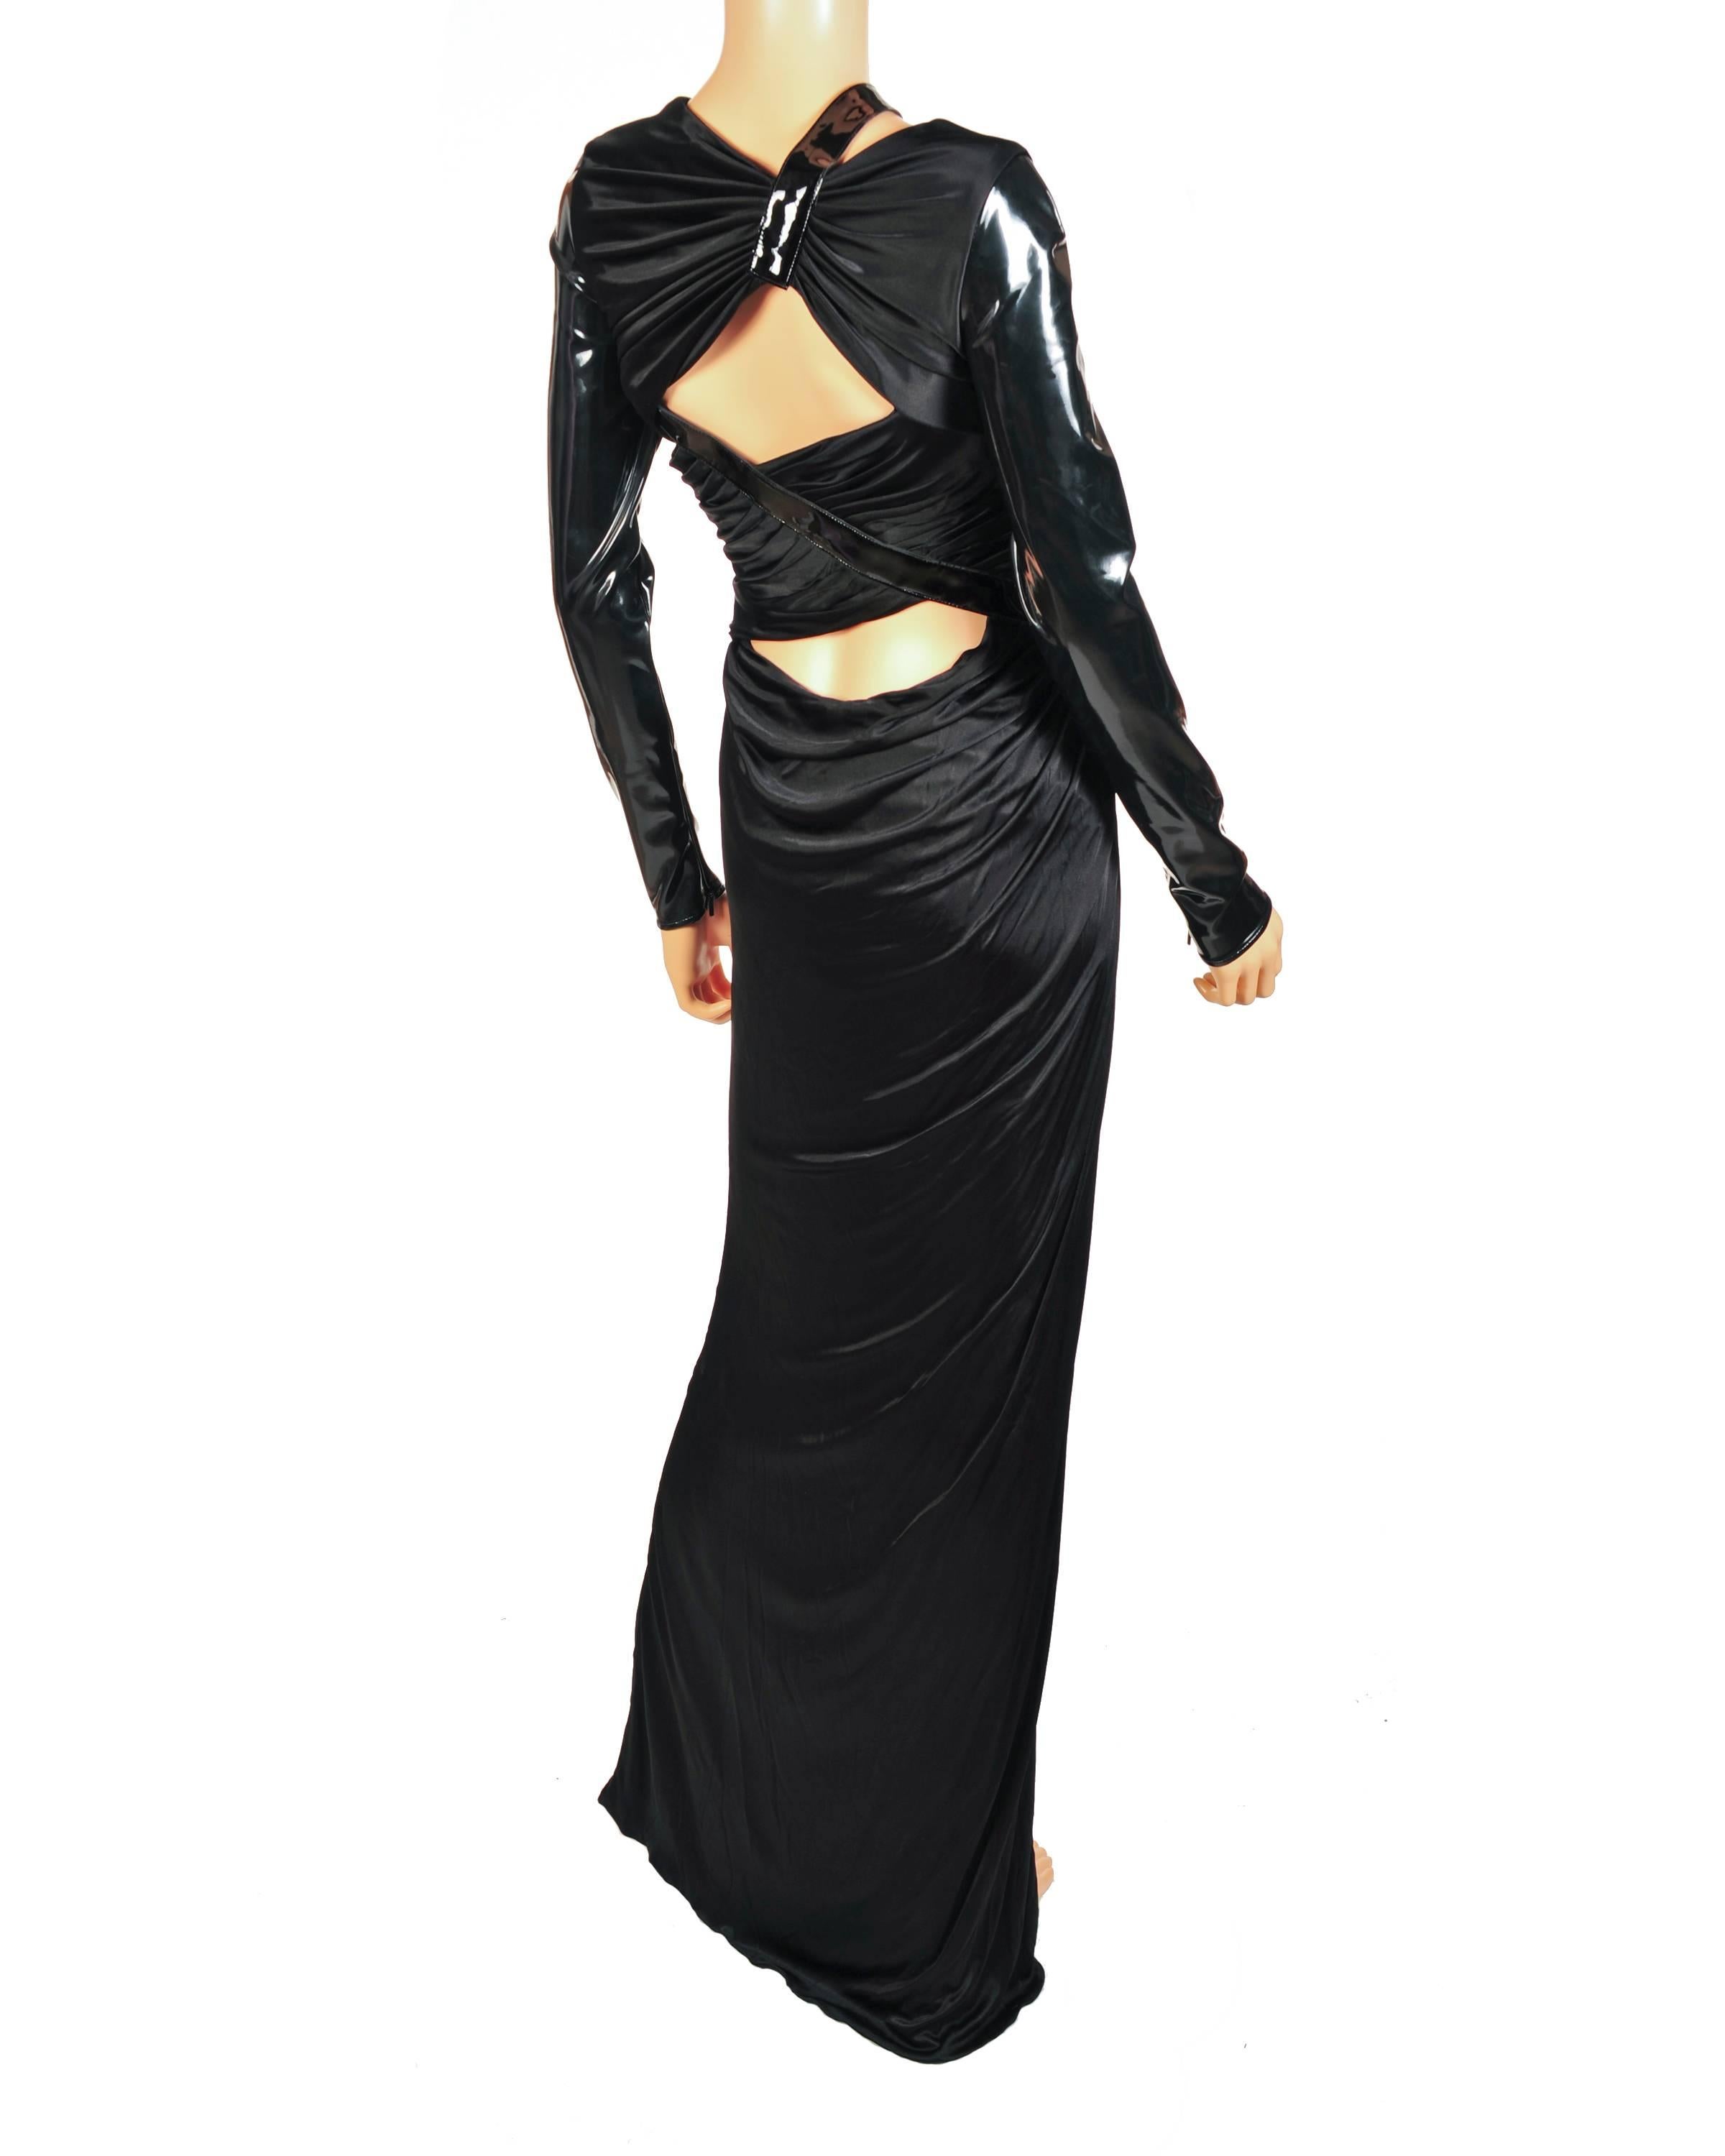 BRAND NEW VERSACE DRESS

This liquid jersey gown from Versace features cutout shoulder detail, 

full-length vinyl sleeves with zip accents, 

and a floor-sweeping skirt with thigh-high slit.

Size 40 - US 4

Made in Italy

New, with tags